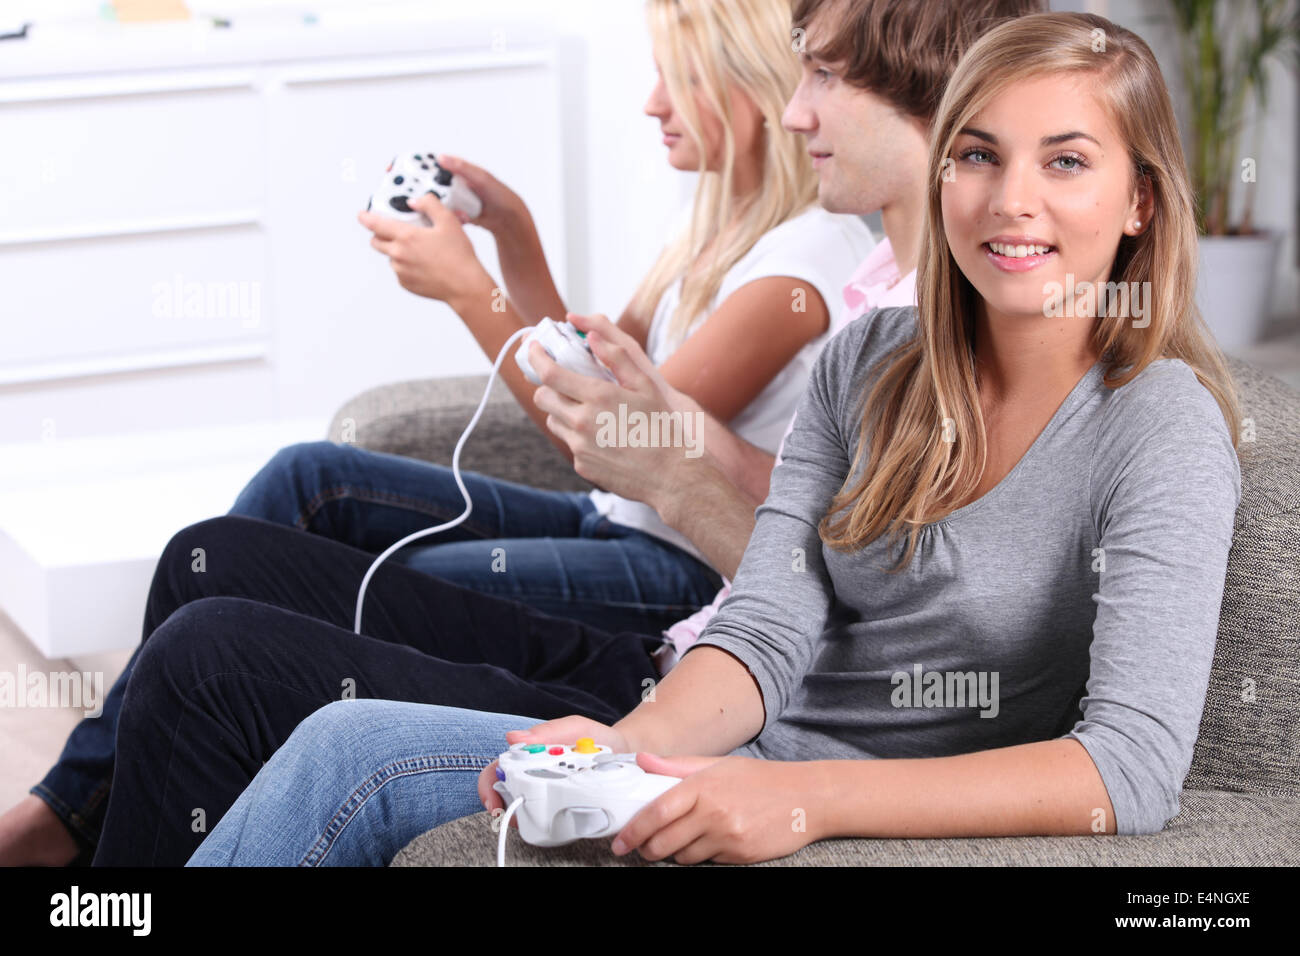 Teenagers playing computer games Stock Photo